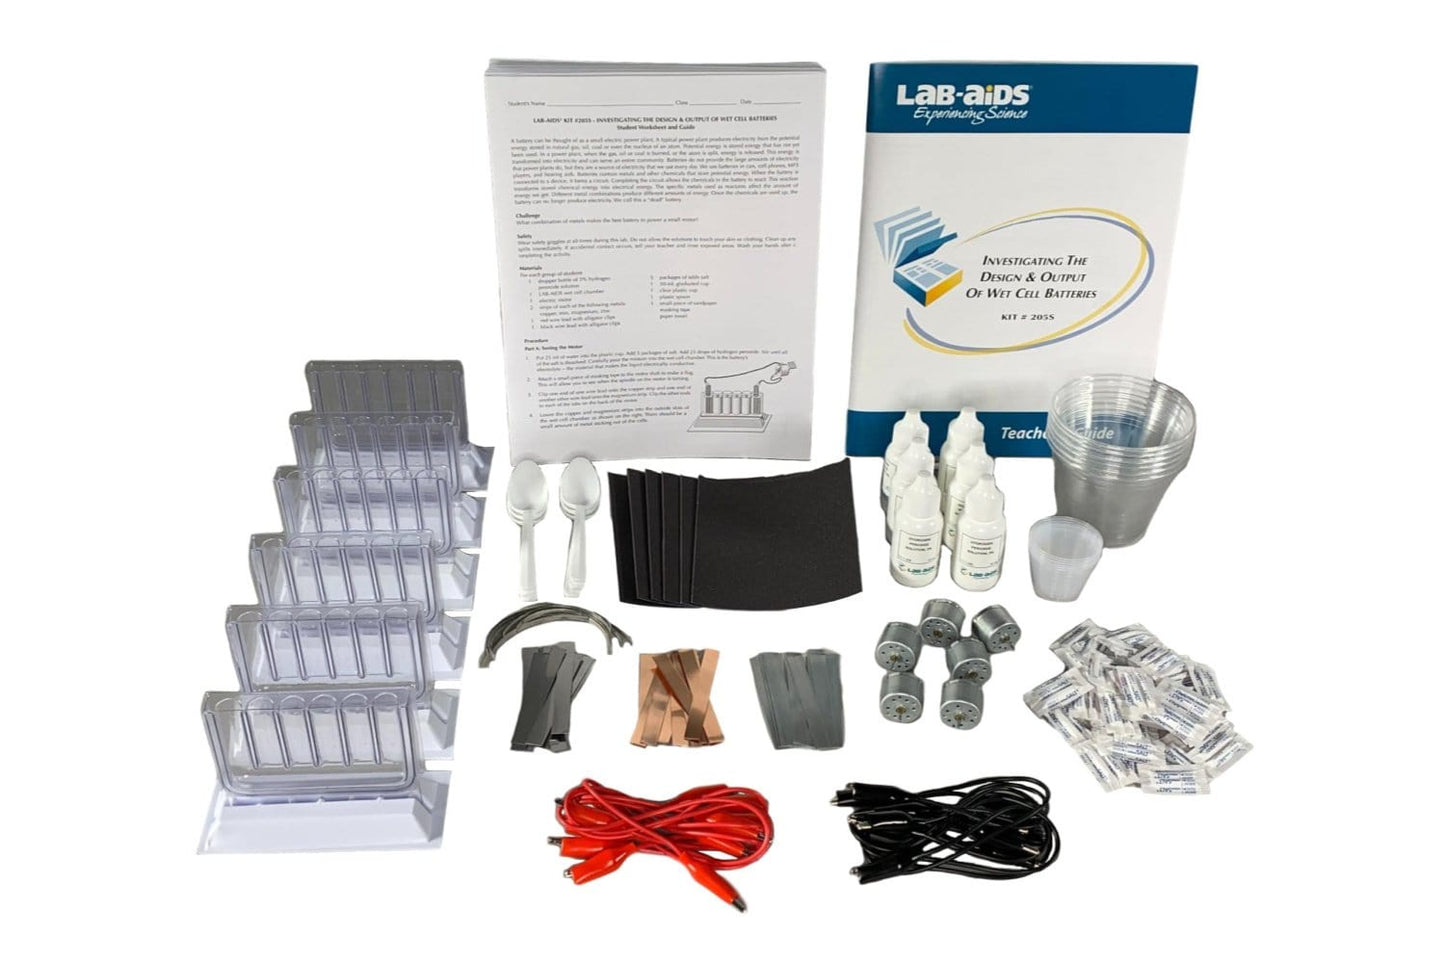 Arbor Scientific Investigating the Design & Output of Wet Cell Batteries Kit